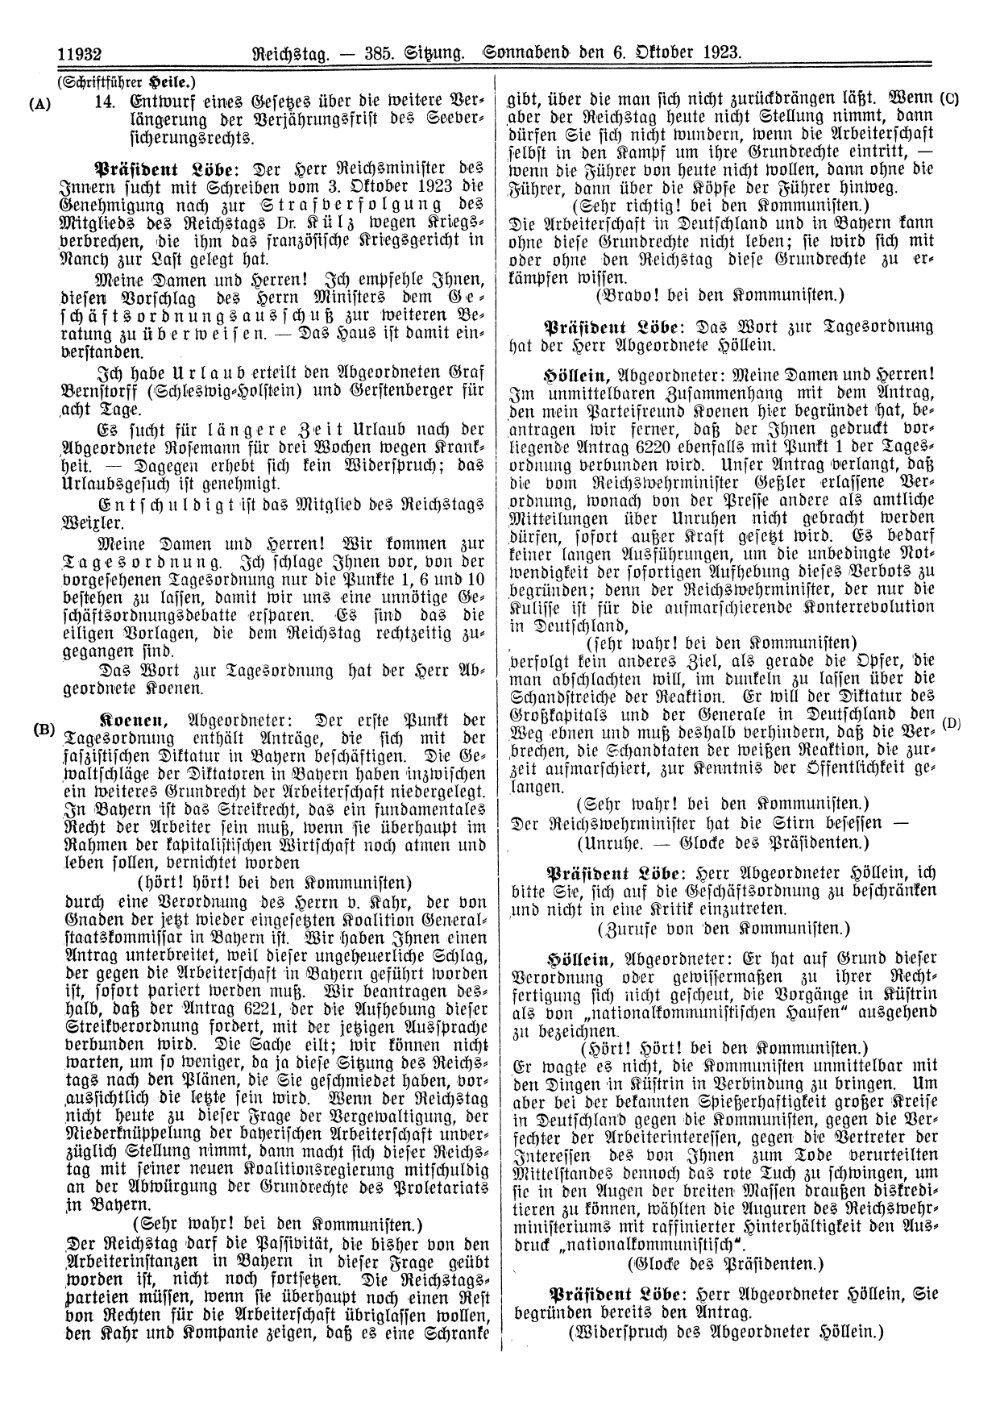 Scan of page 11932